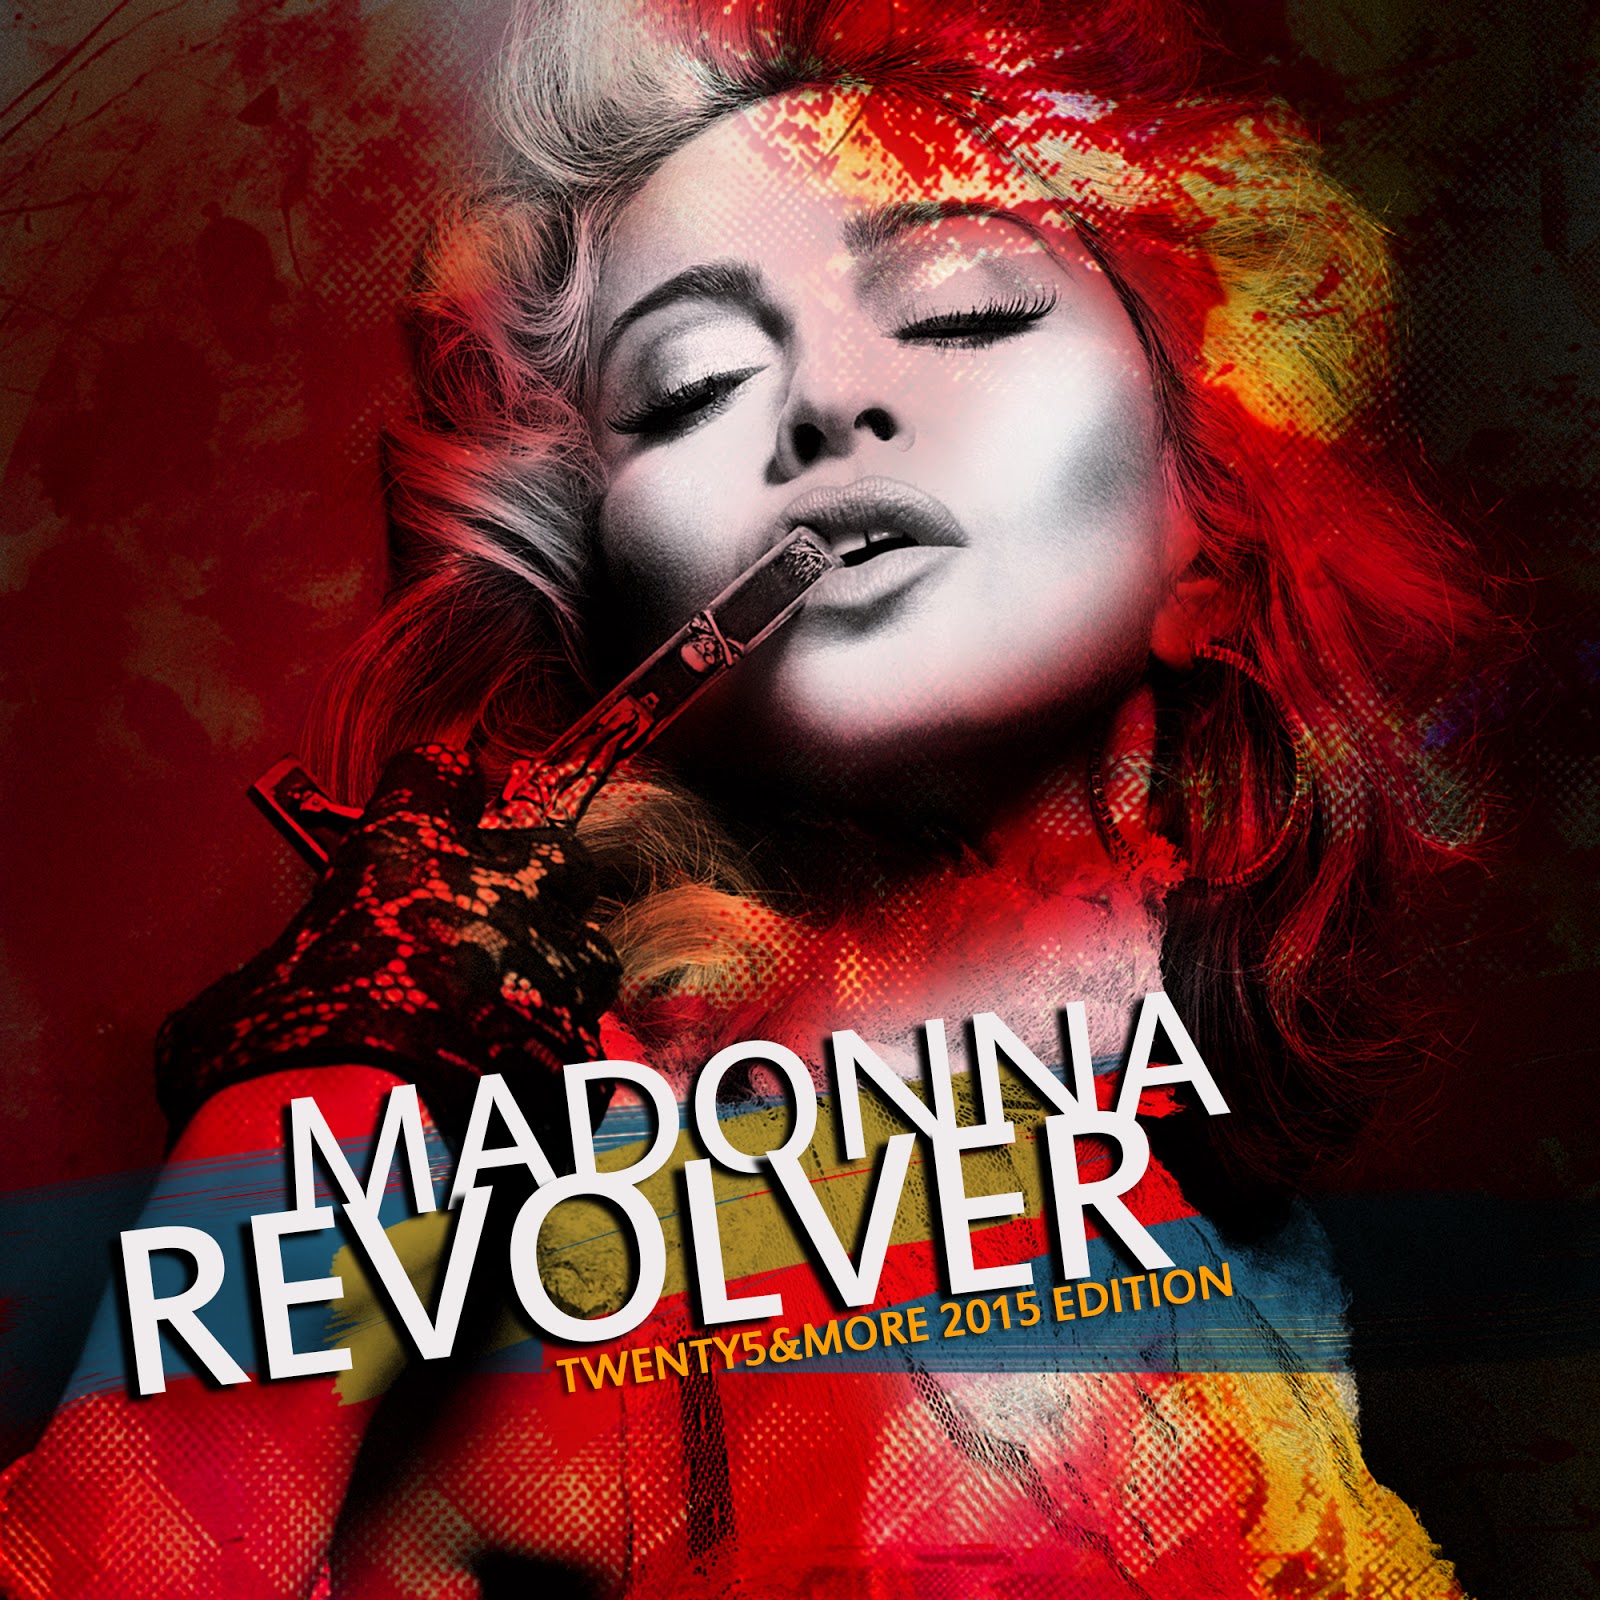 Madonna FanMade Covers: Revolver - 2015 Edition